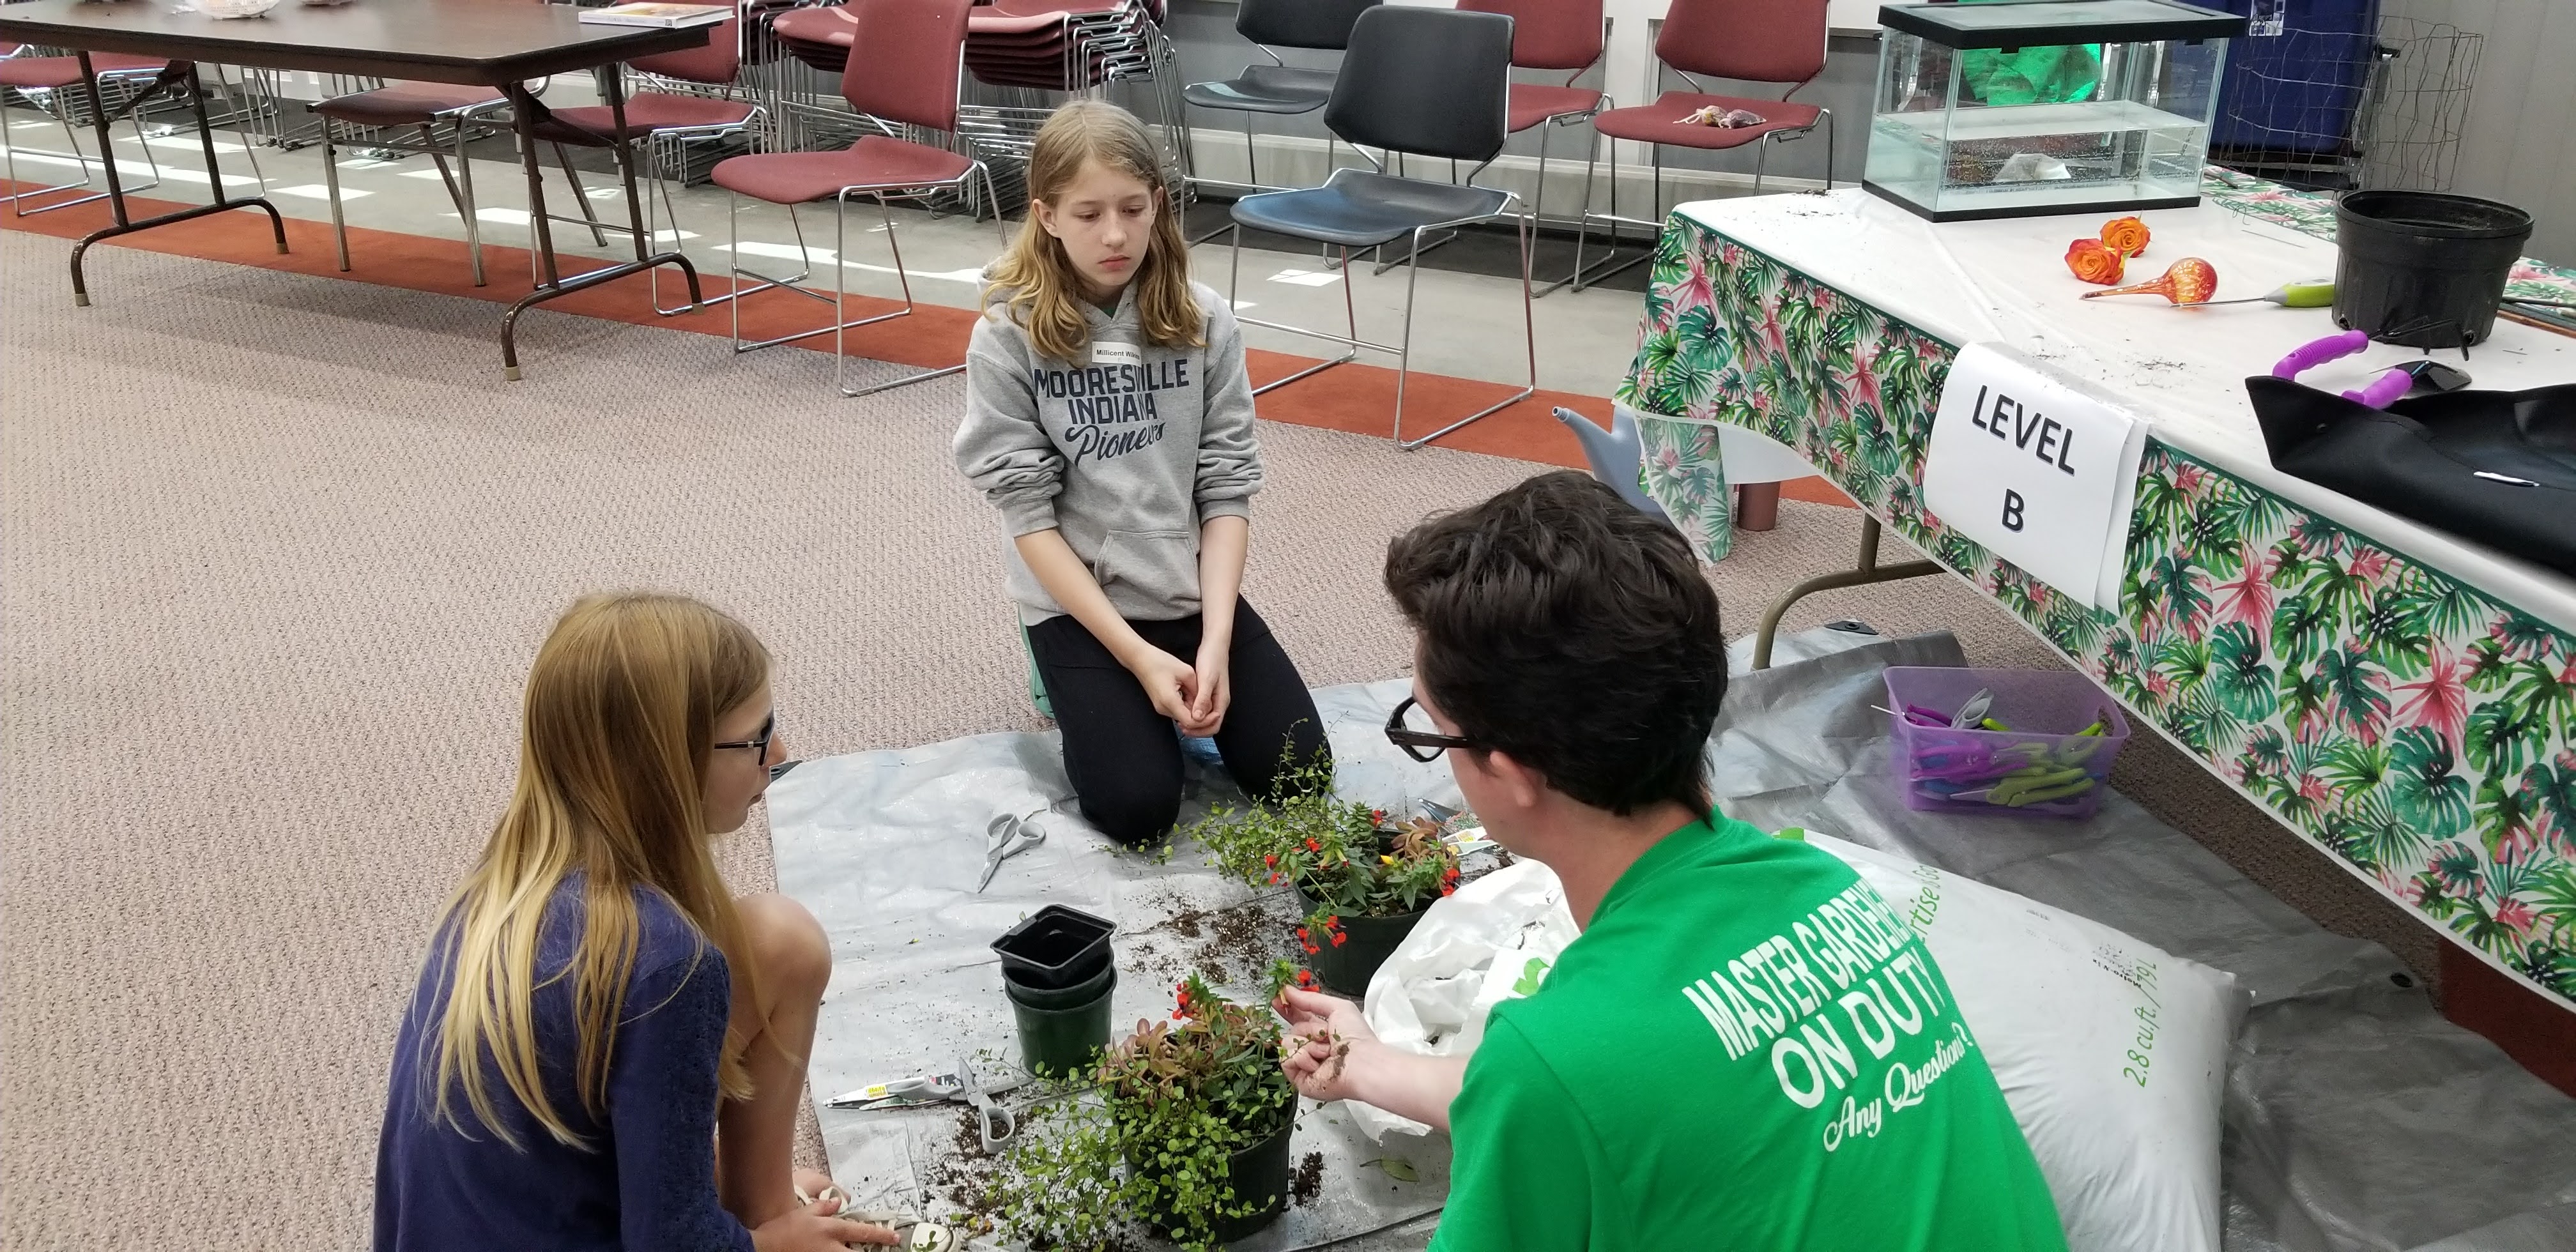 Morgan County Master Gardener Teaching 4-H Youth How to Plant a Mixed Planter